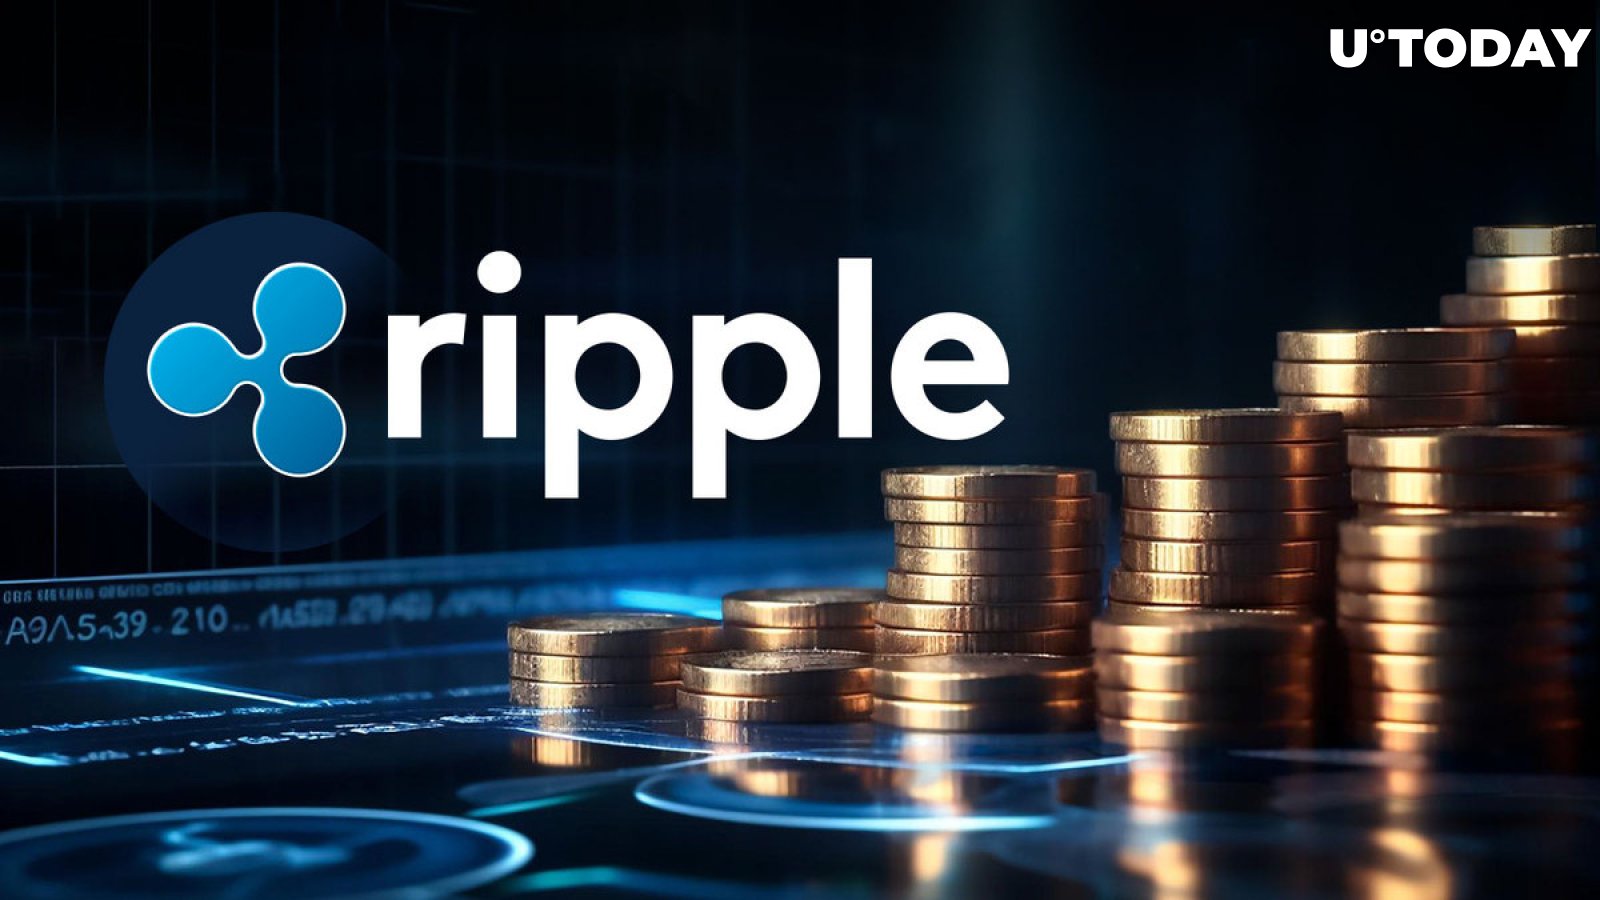 Ripple Fully Ready to Launch Stablecoin: Middle East and Africa Managing Director